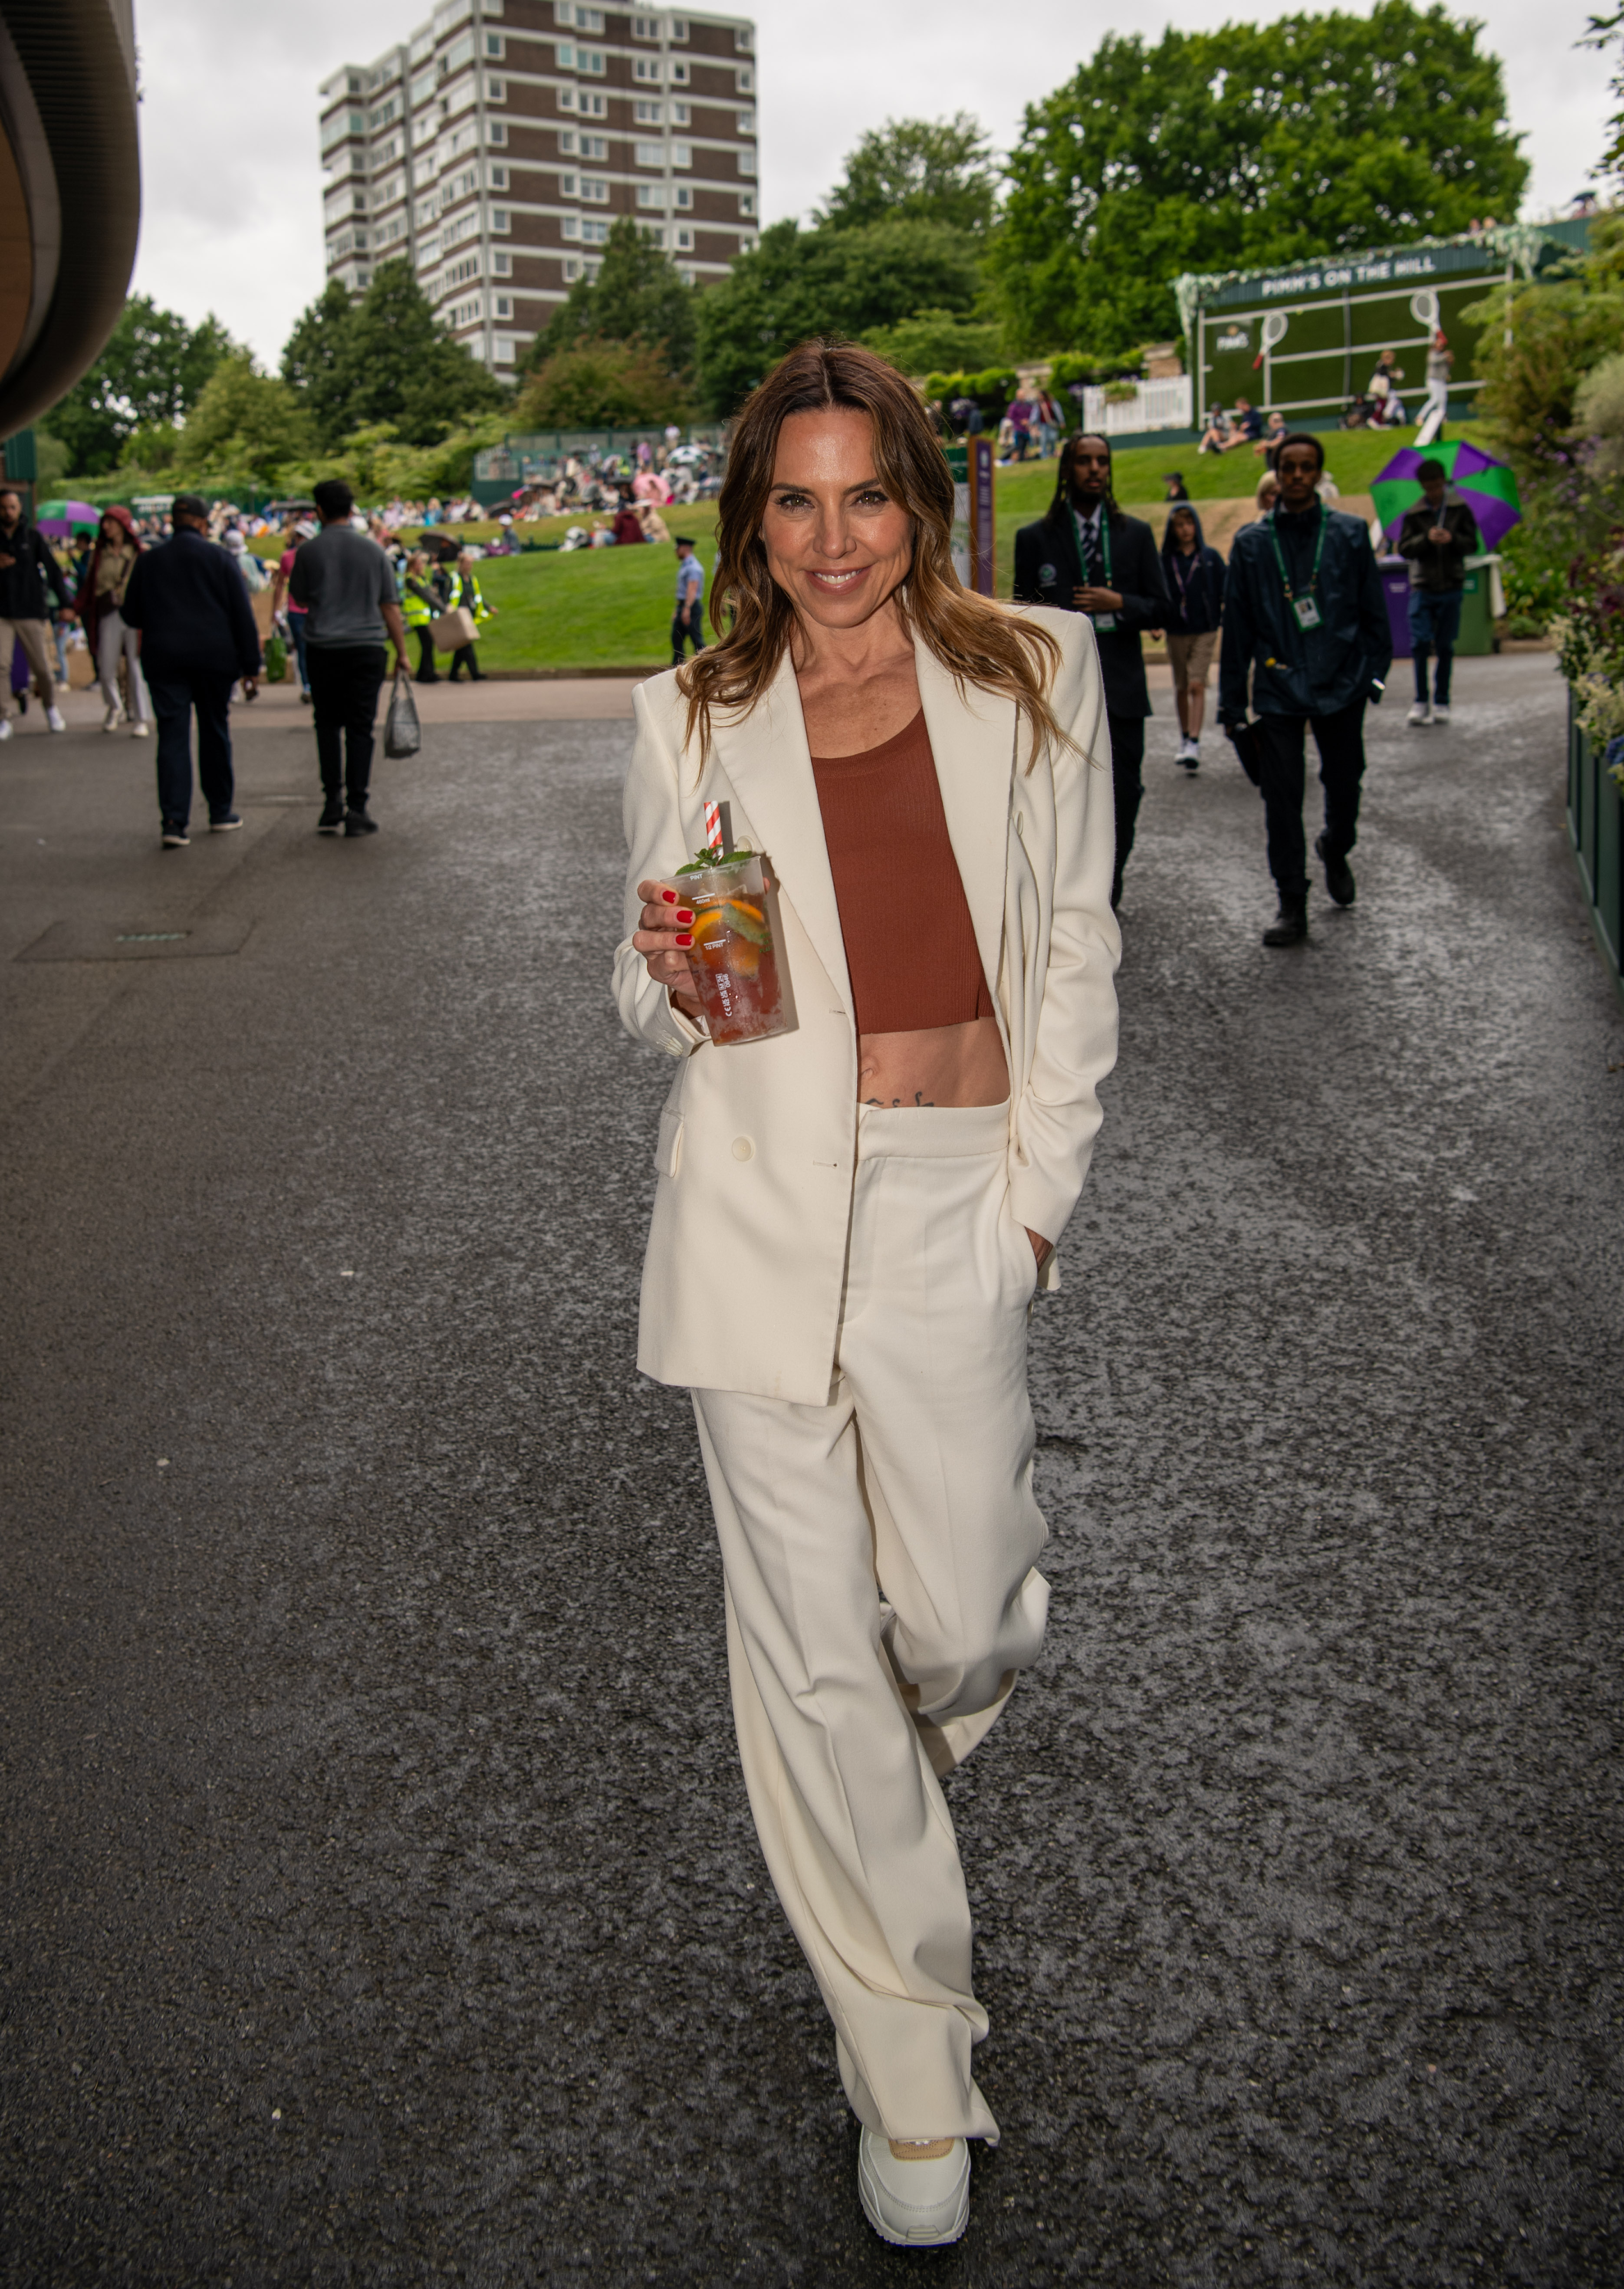 Mel beamed as she spent the day at the annual tennis event